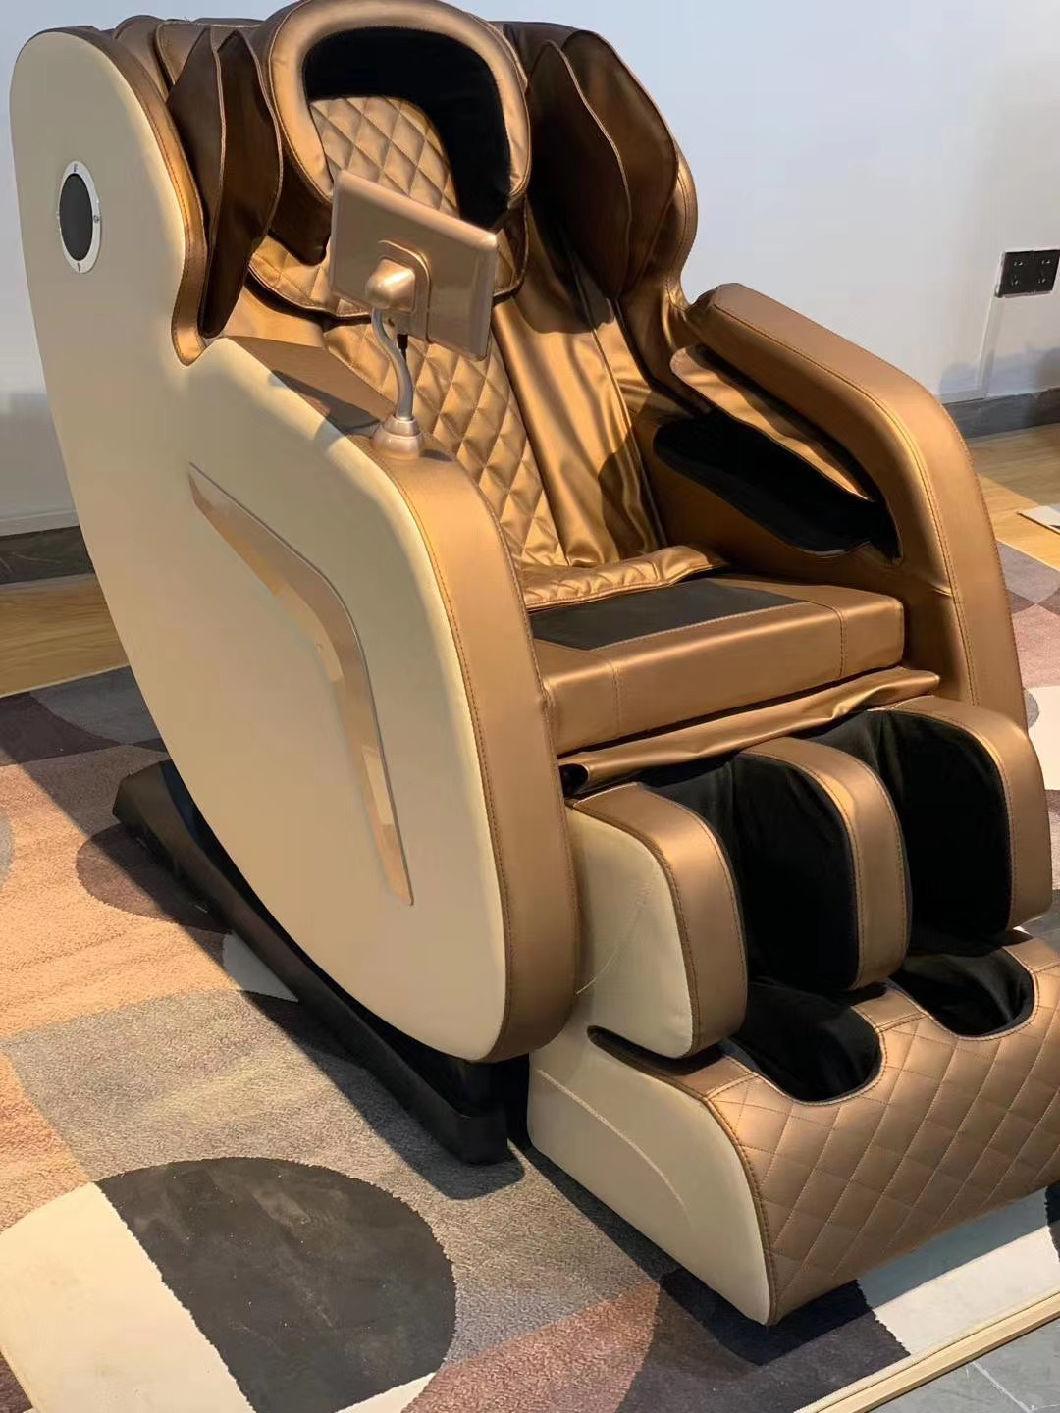 Multifunctional Electric Massage Chair Bluetooth Music Sharing Home Space Capsule Sofa for Gifts Cross-Border Factory Direct Sales Multifunctional Massager